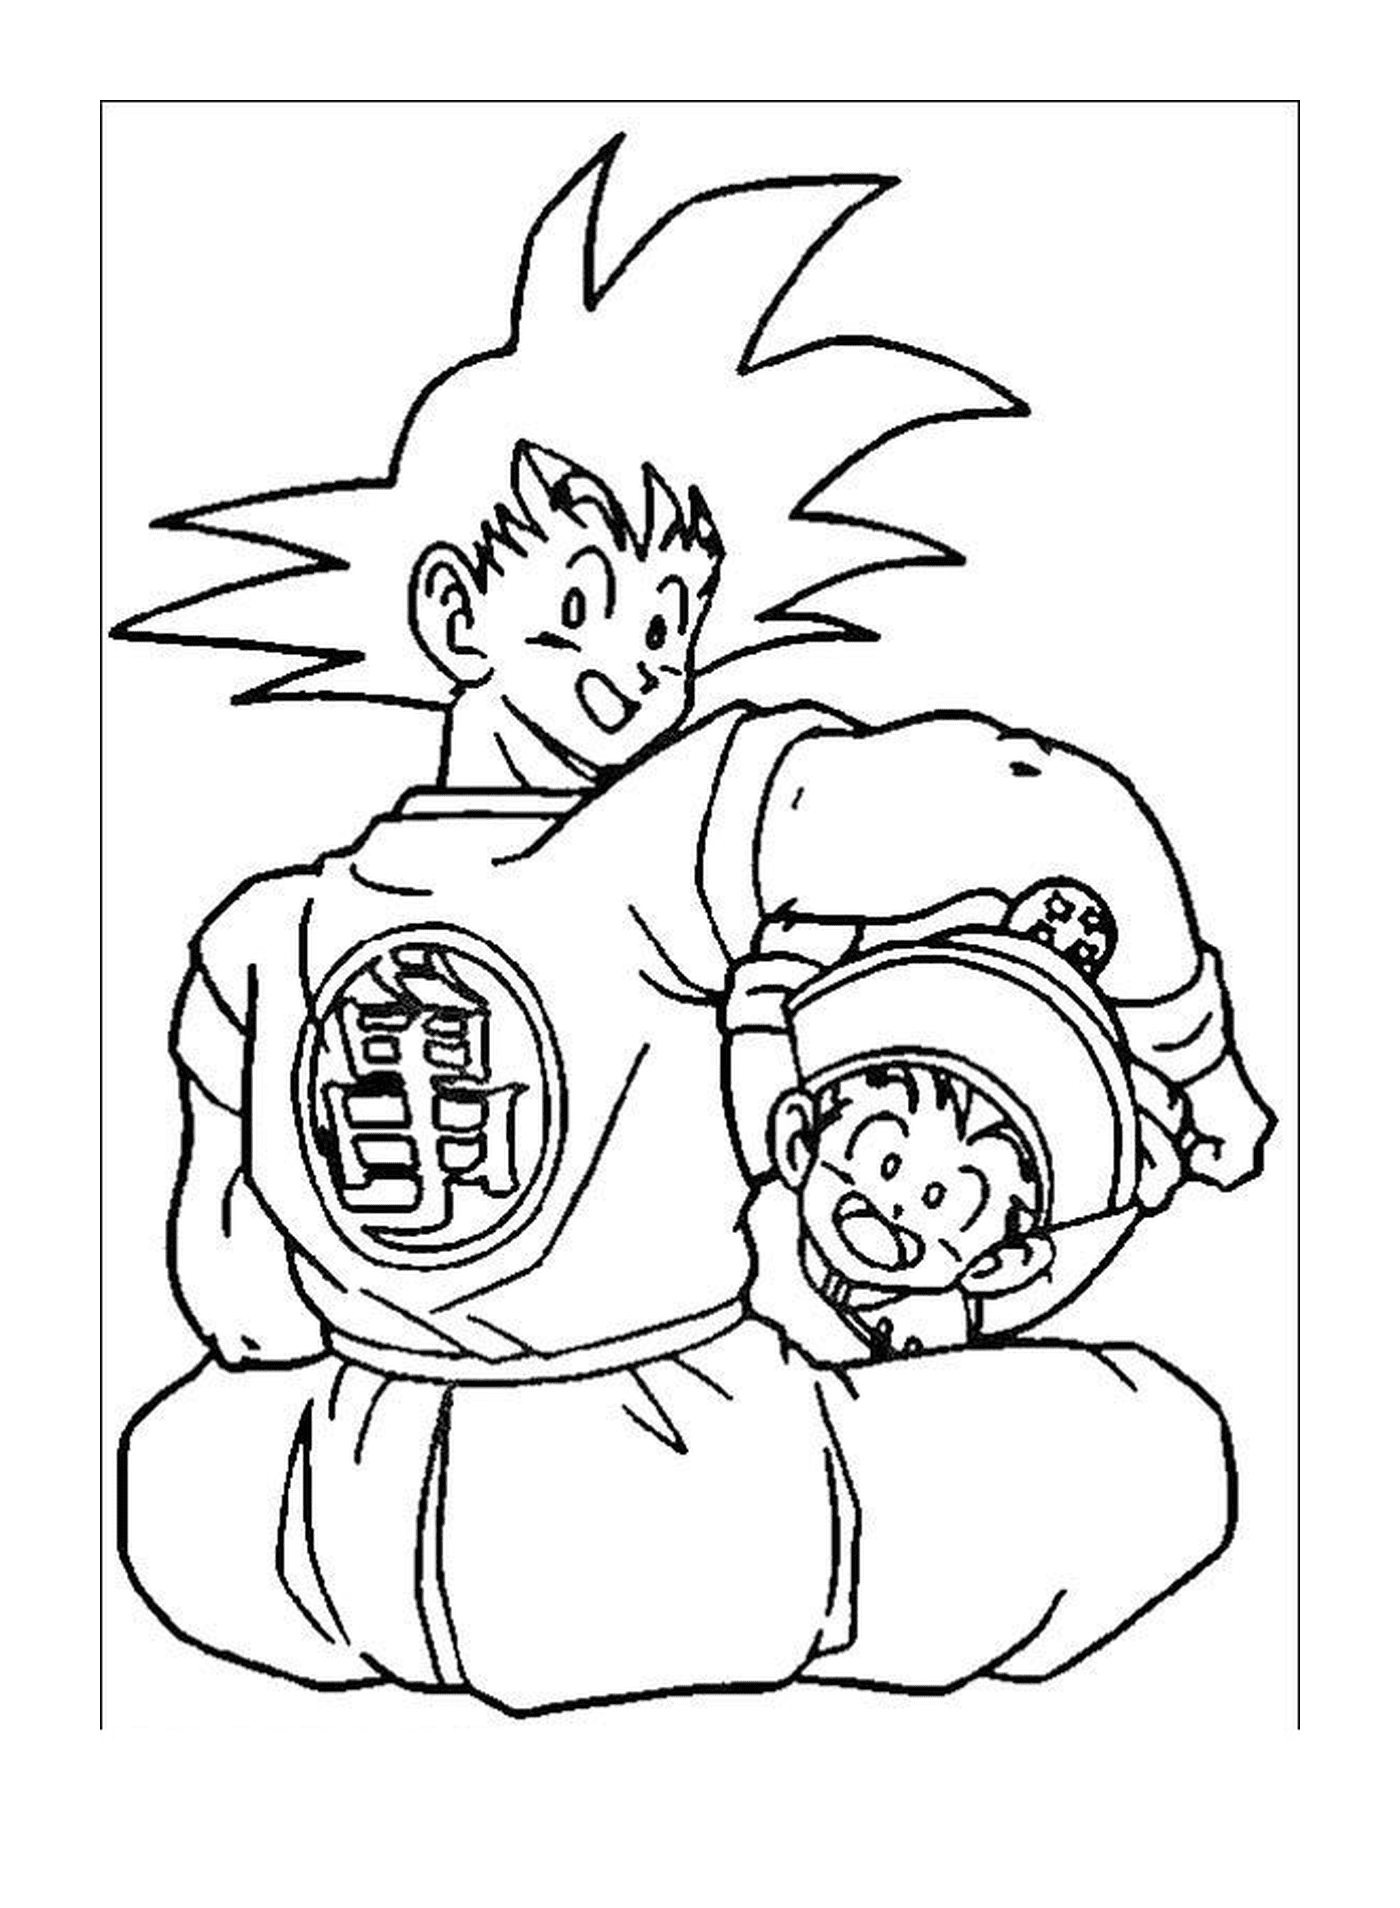  Goku with his son and a monkey 